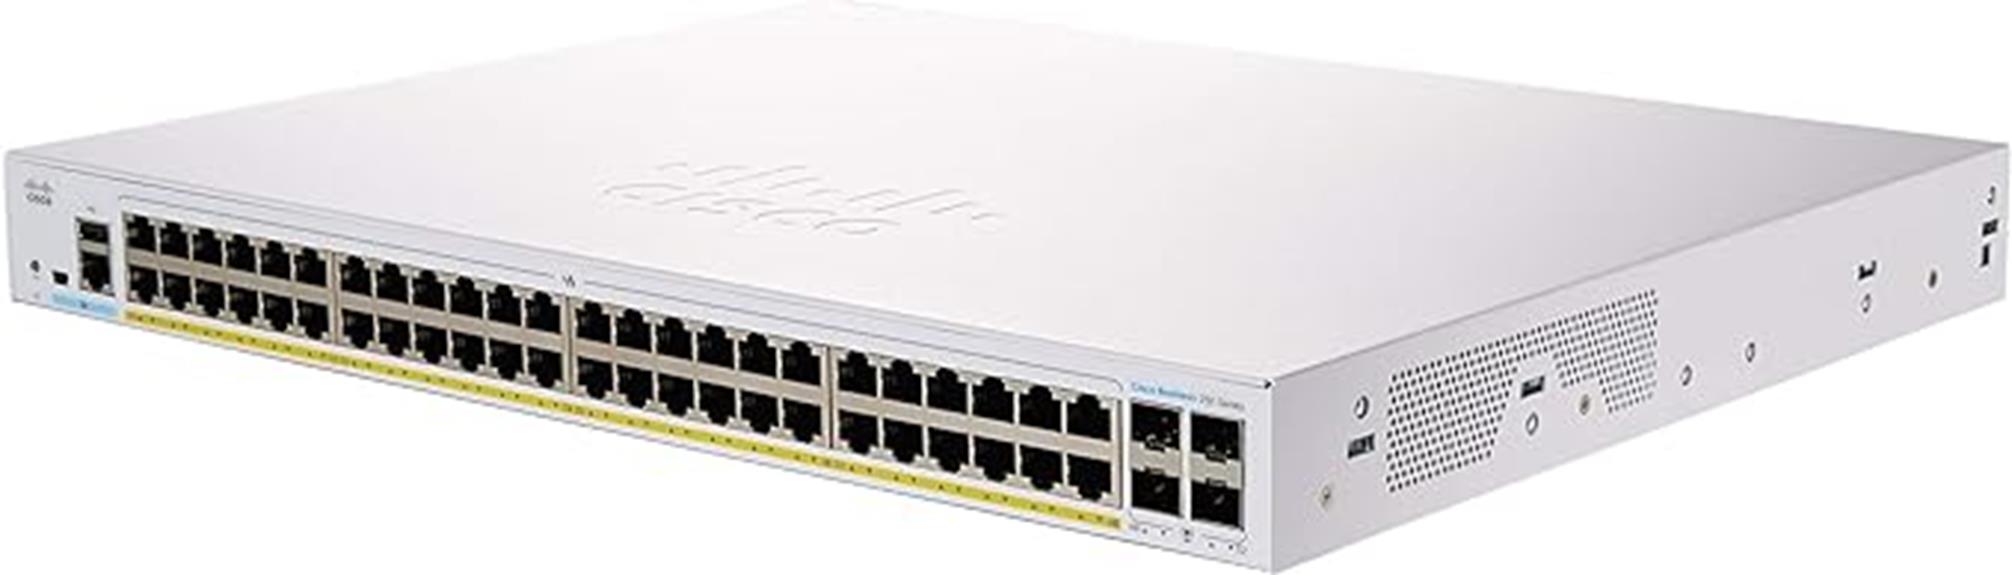 cisco smart switch review